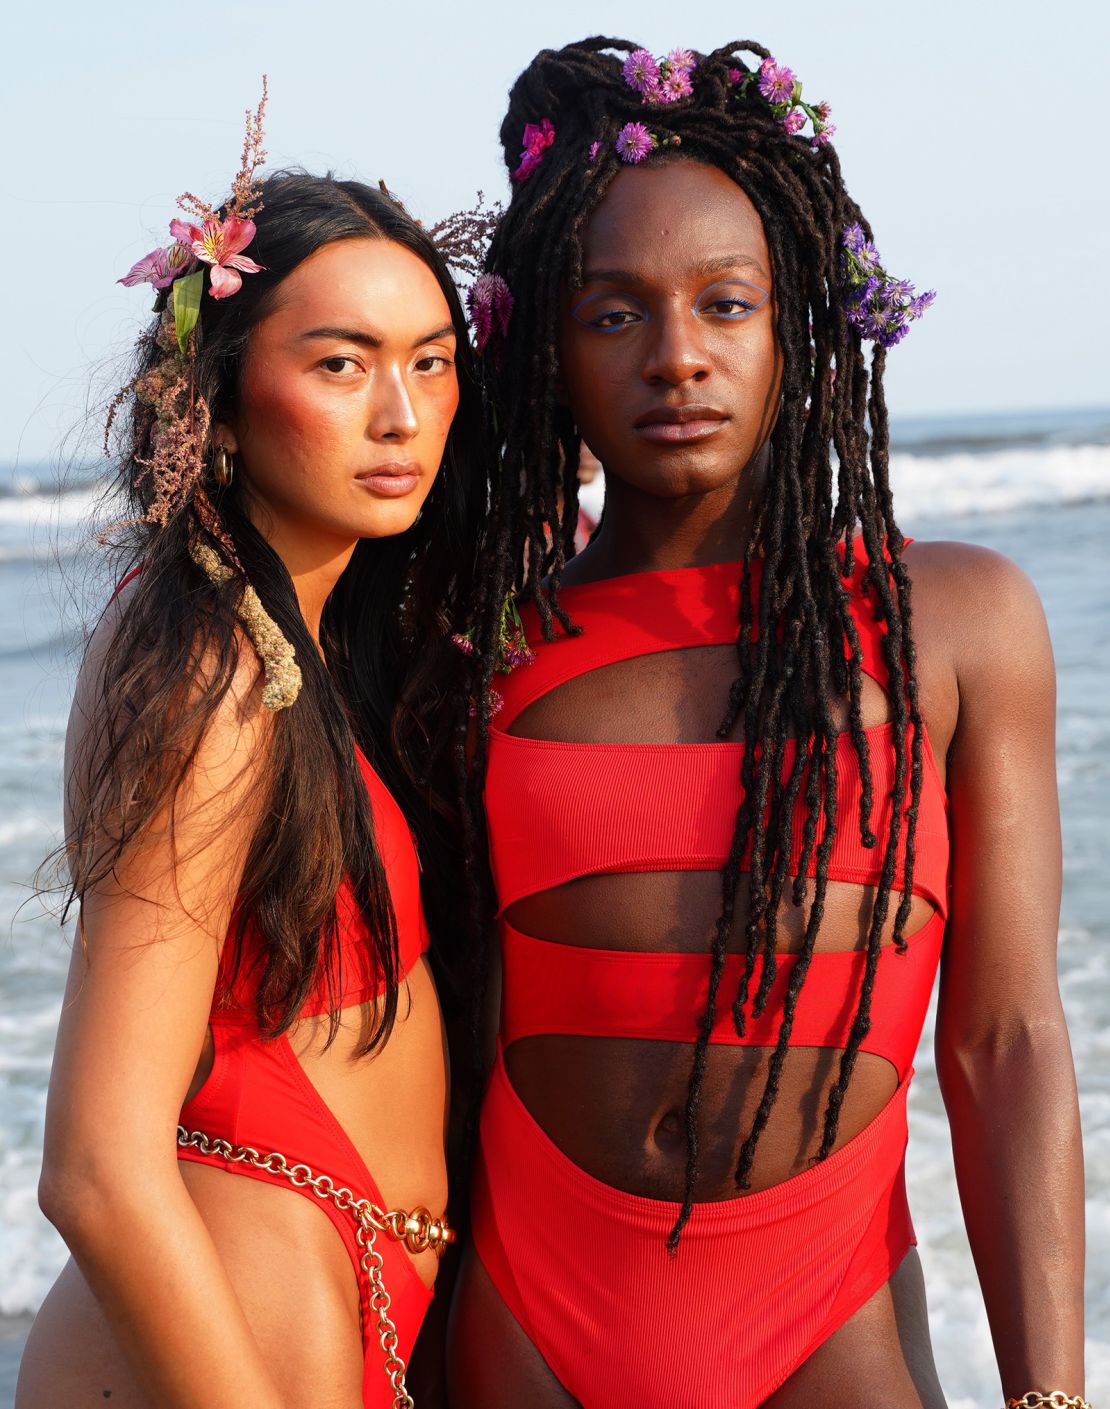 From Chromat to Skims, inclusive design is radically changing the bathing  suit silhouette